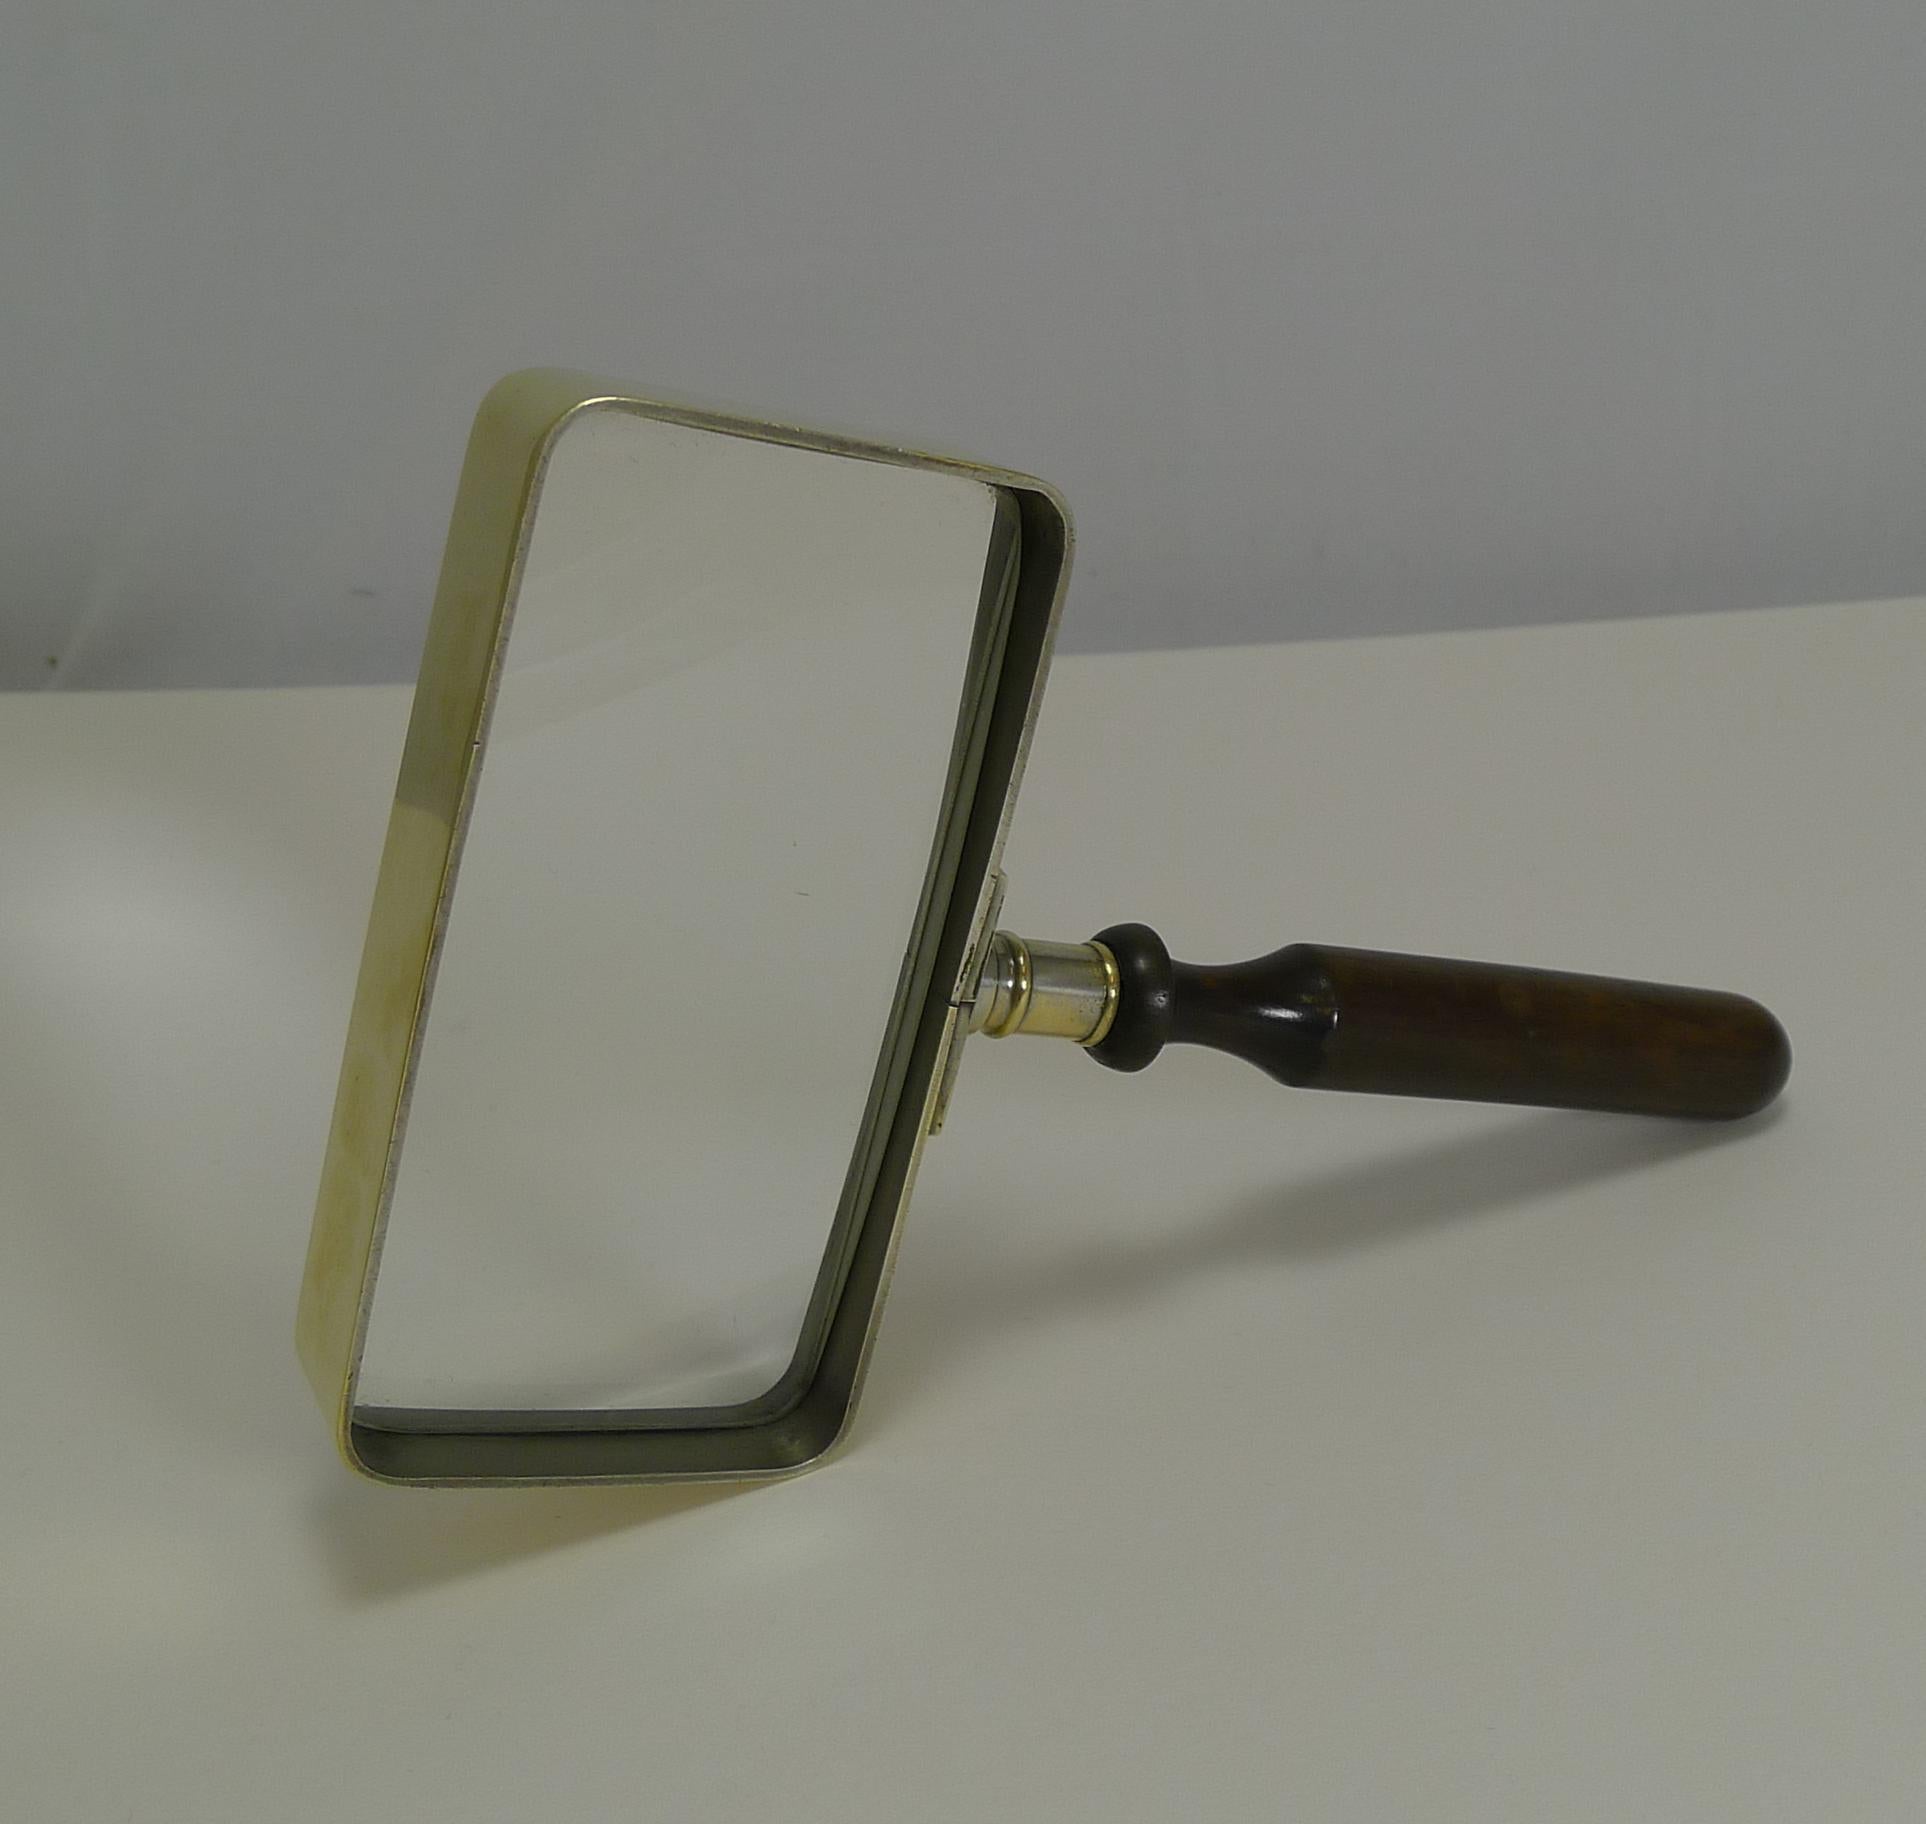 A handsome Edwardian brass framed rectangular magnifying glass professionally polished to gleam. The handle is made form turned ebony wood.

Dating to circa1900, the glass is in excellent condition with a good strong magnification. Measures: 4